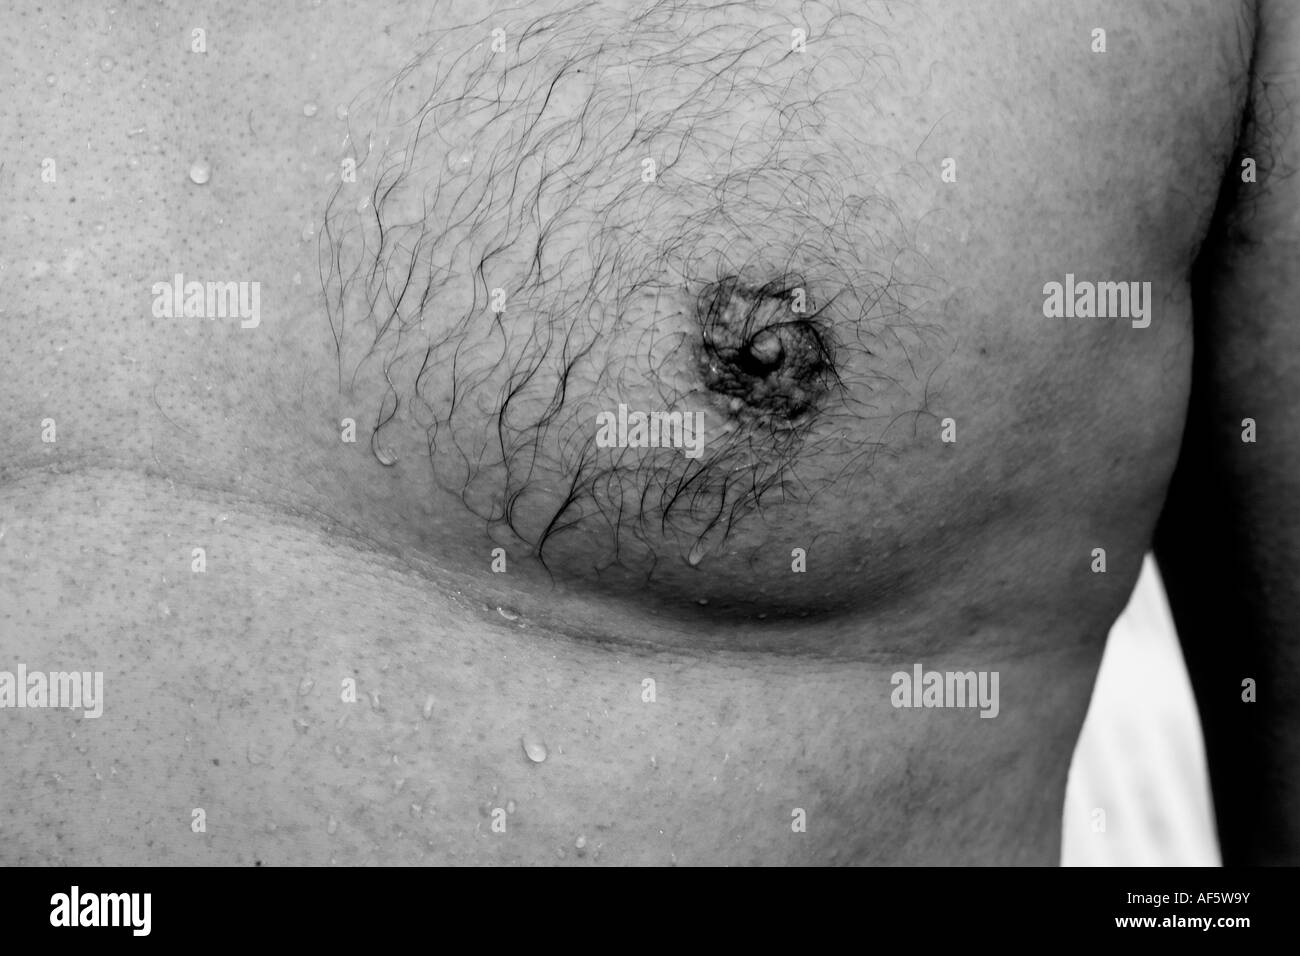 mans boobs, black and white image off a bare male boob/chest Stock